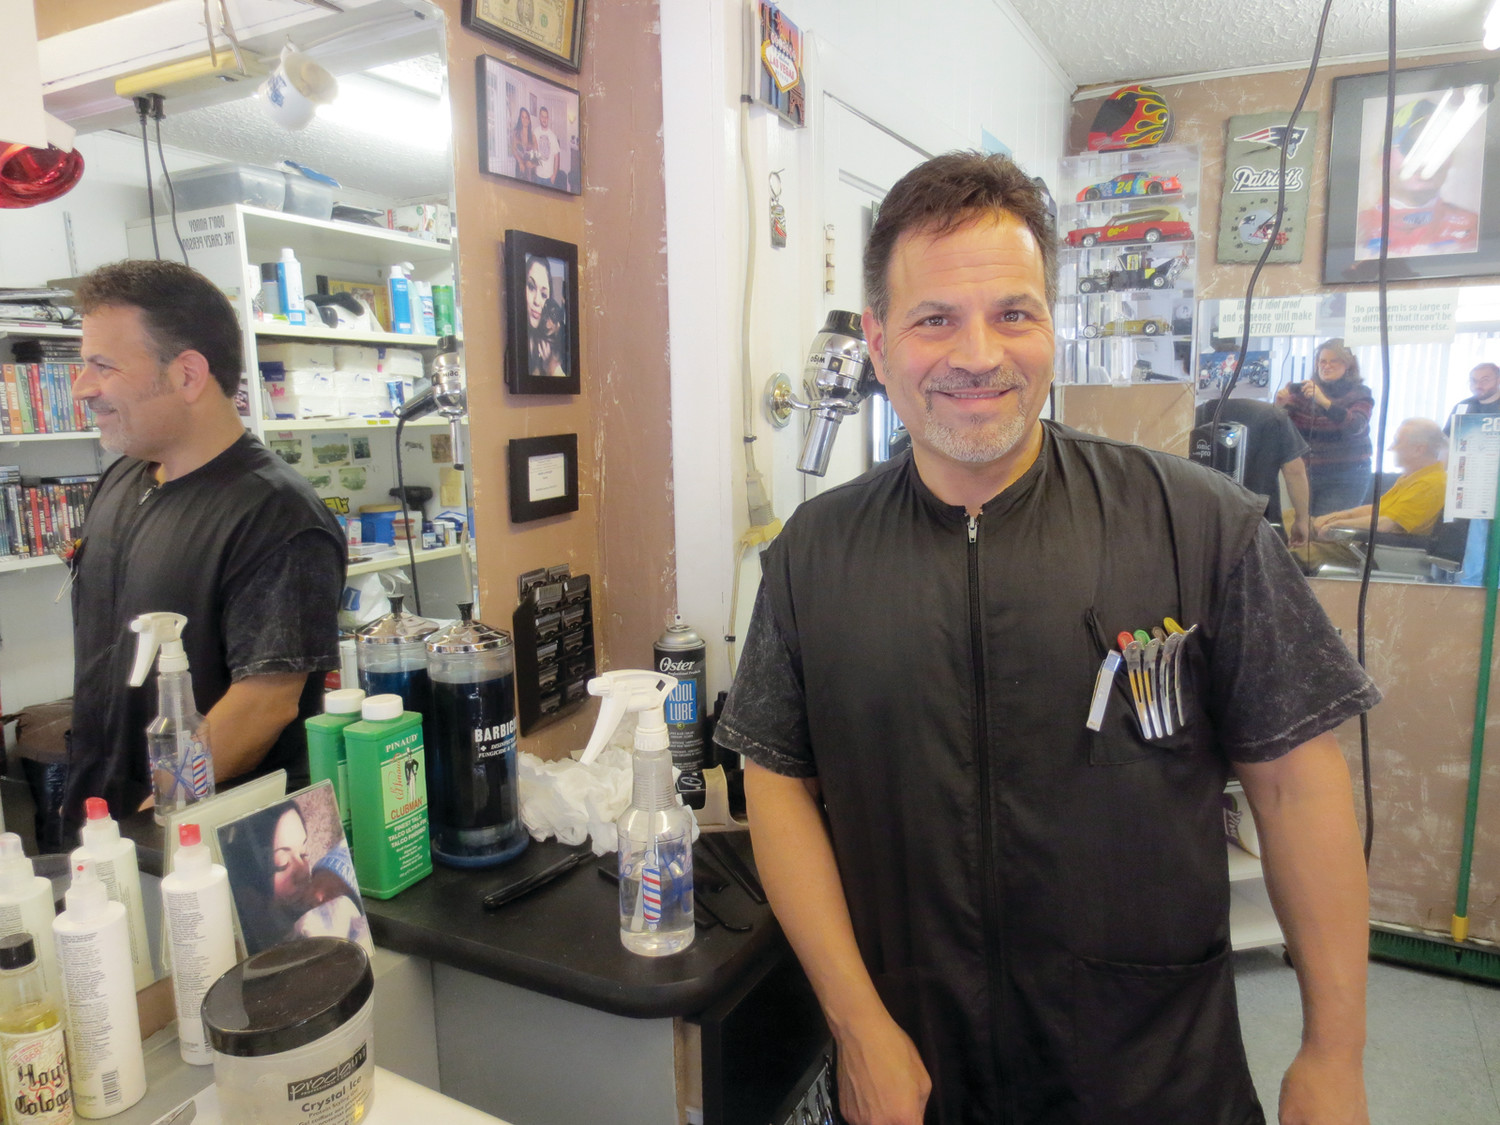 Meet Dave Picozzi, owner of David’s Greenwood Barbershop, seen here cutting the hair of his loyal customer and longtime friend Ken D’Ambrosio.